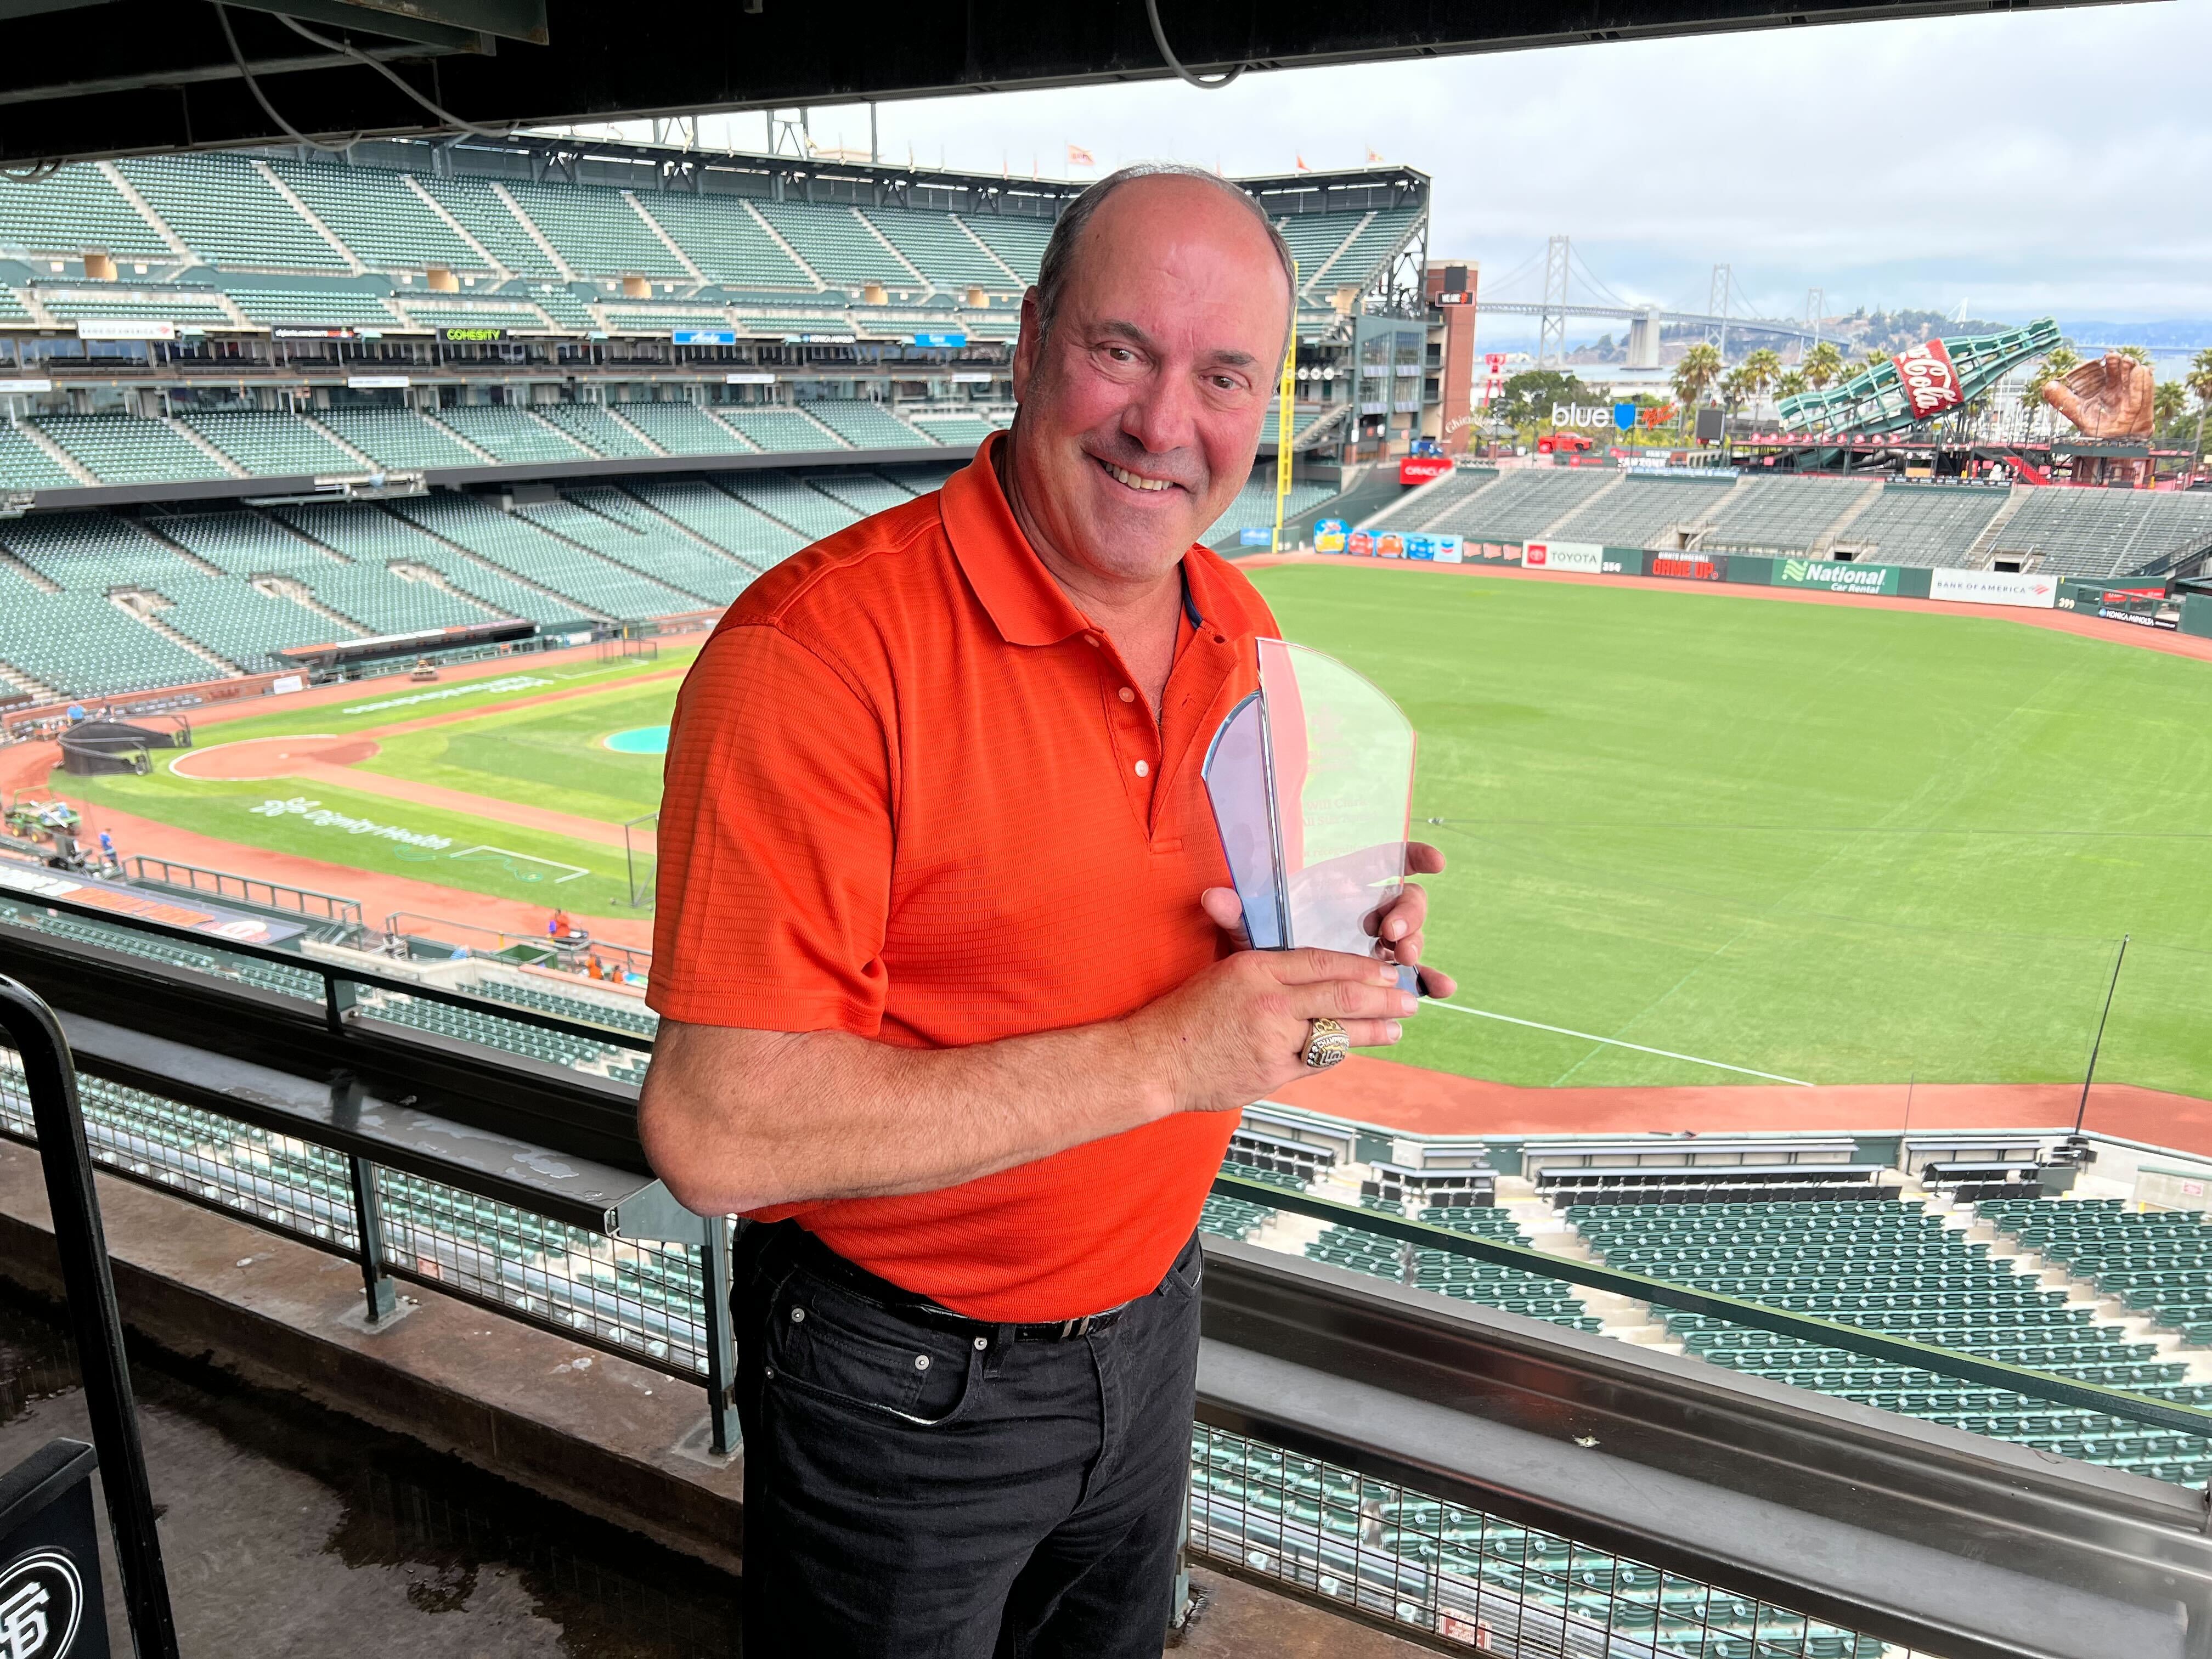 MLB legend Will Clark “thrilled” to be an advocate for autism community